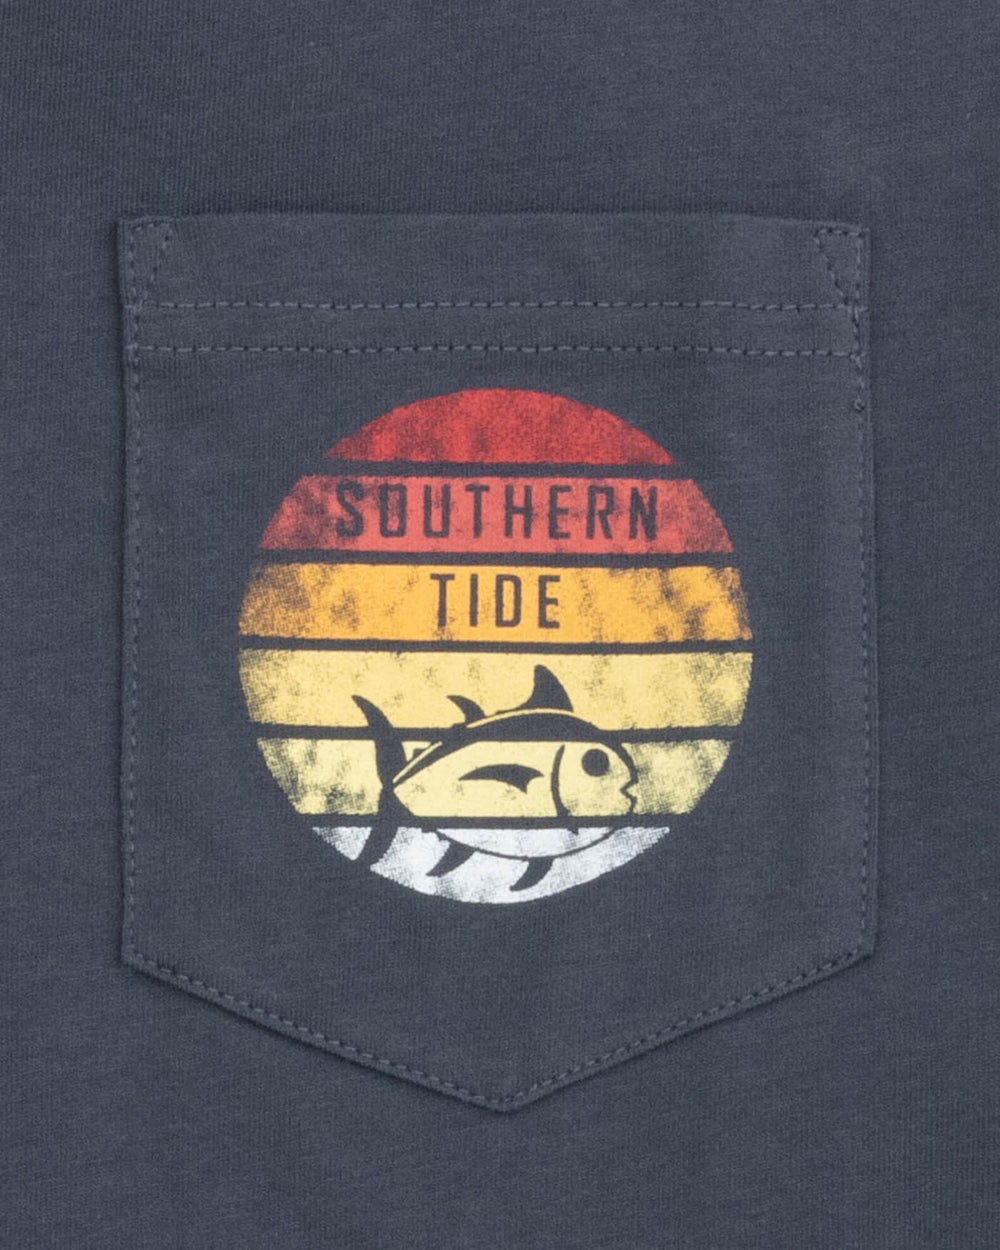 The detail view of the Southern Tide Southern Tide Circle Gradient T-Shirt by Southern Tide - Ombre Blue